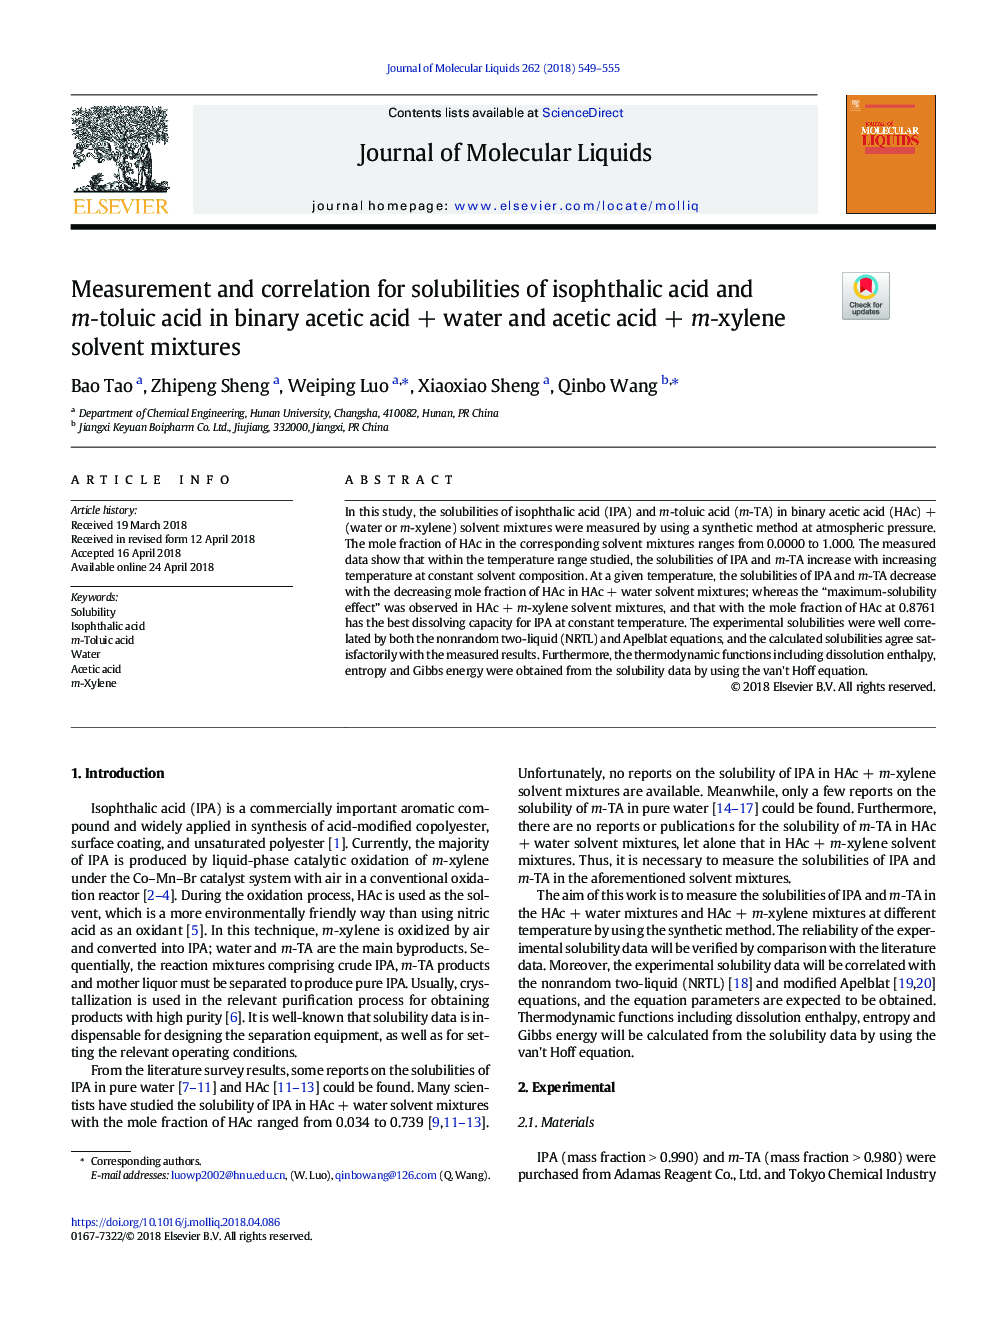 Measurement and correlation for solubilities of isophthalic acid and m-toluic acid in binary acetic acidâ¯+â¯water and acetic acidâ¯+â¯m-xylene solvent mixtures